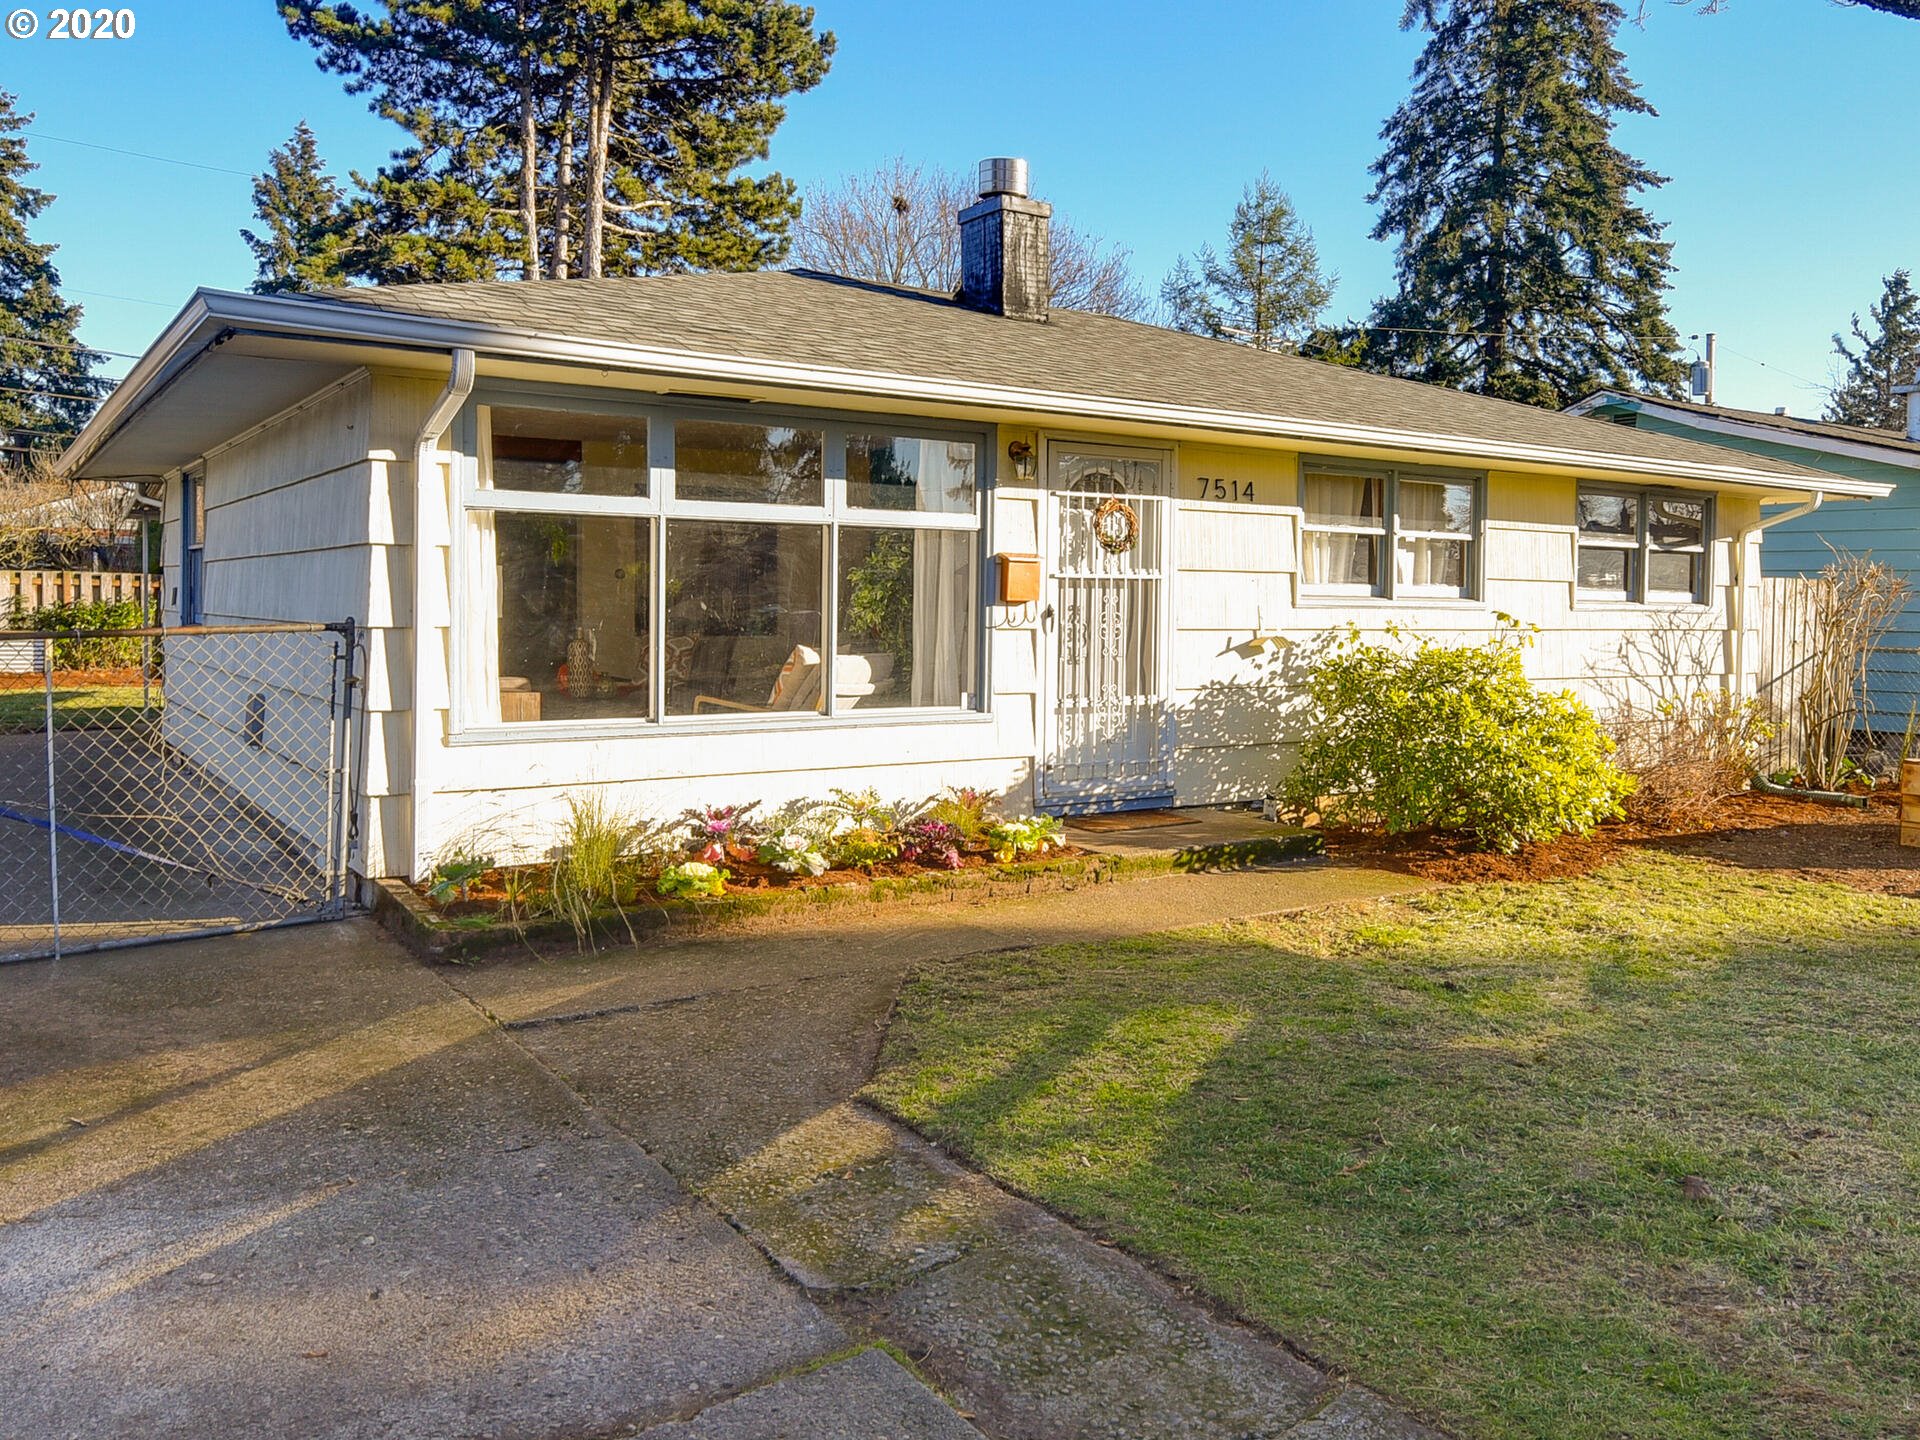 7514 SE 68TH AVE (1 of 31)